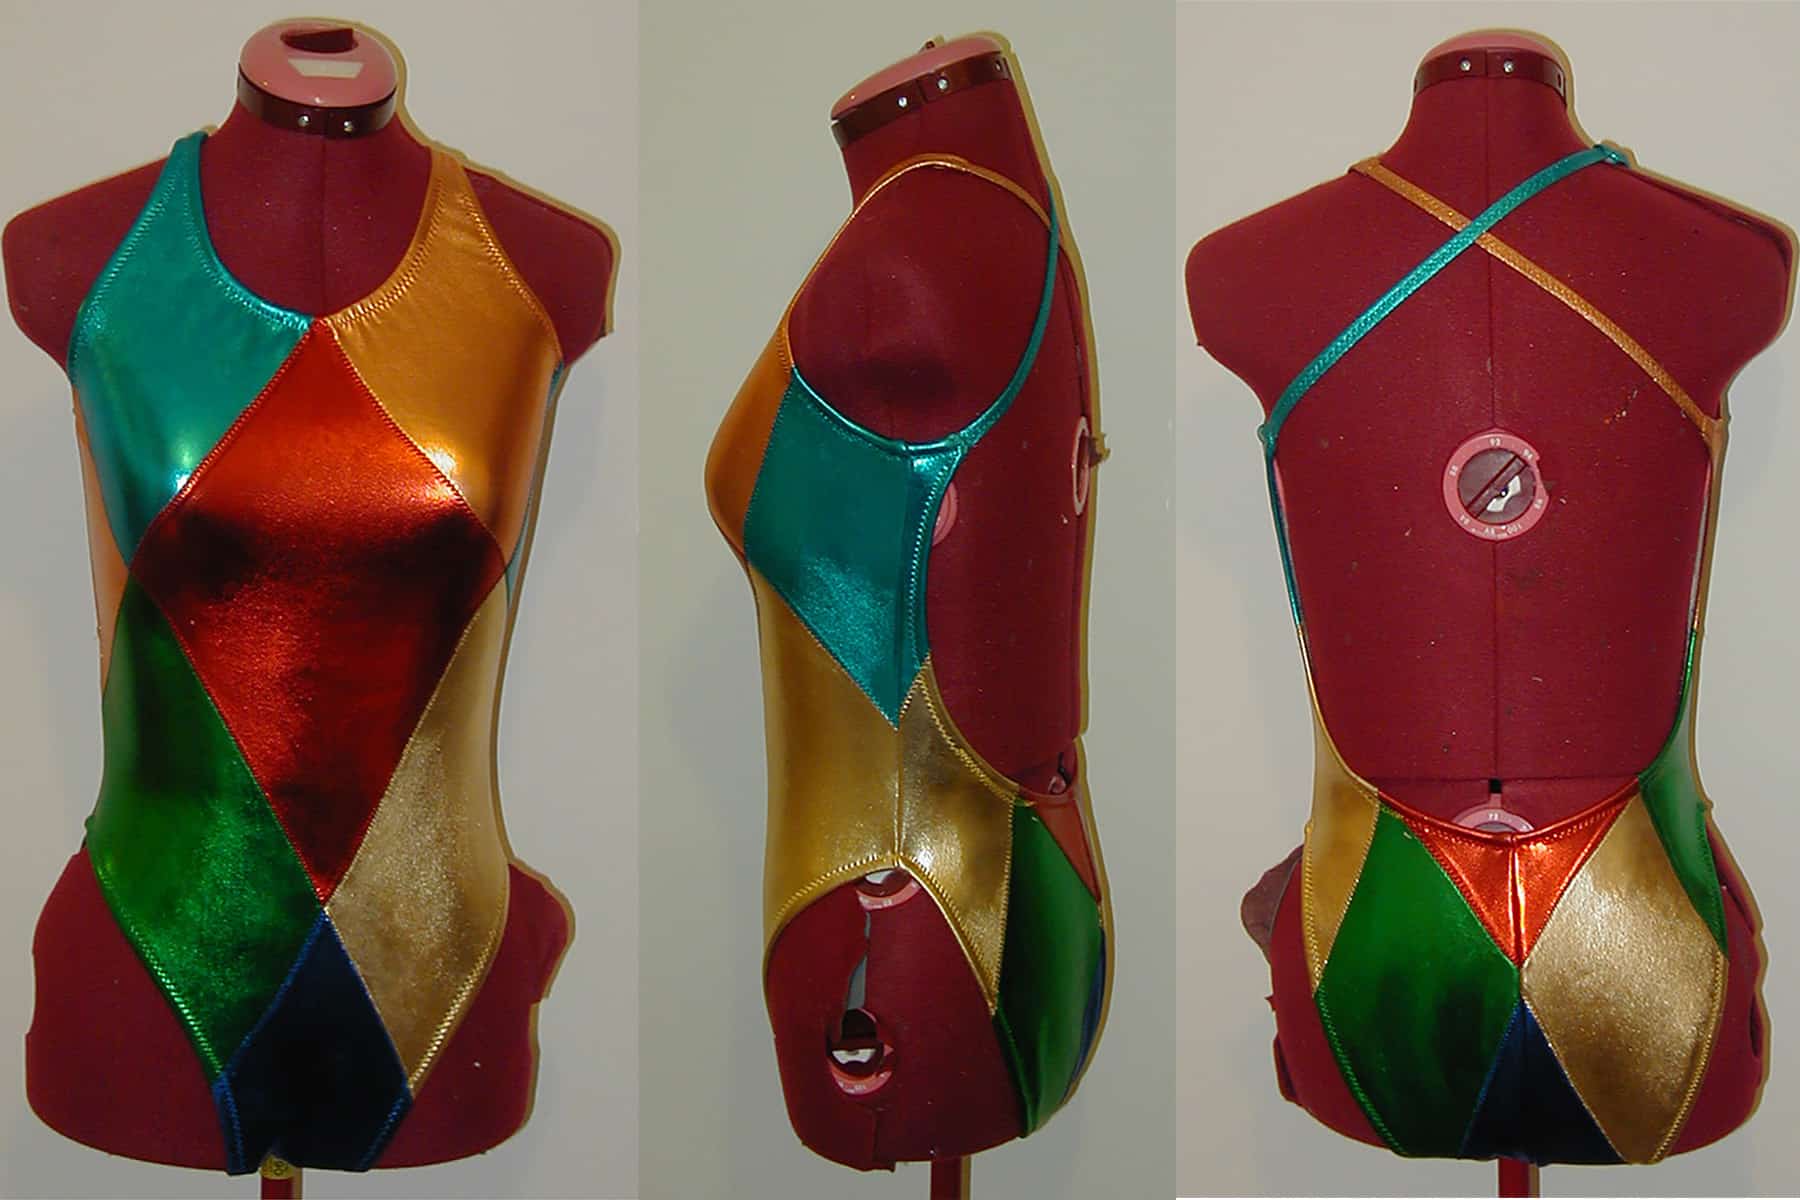 Front, back, and side views of a Harlequin stype synchro swim suit, in blue, orange, red, green, and gold.